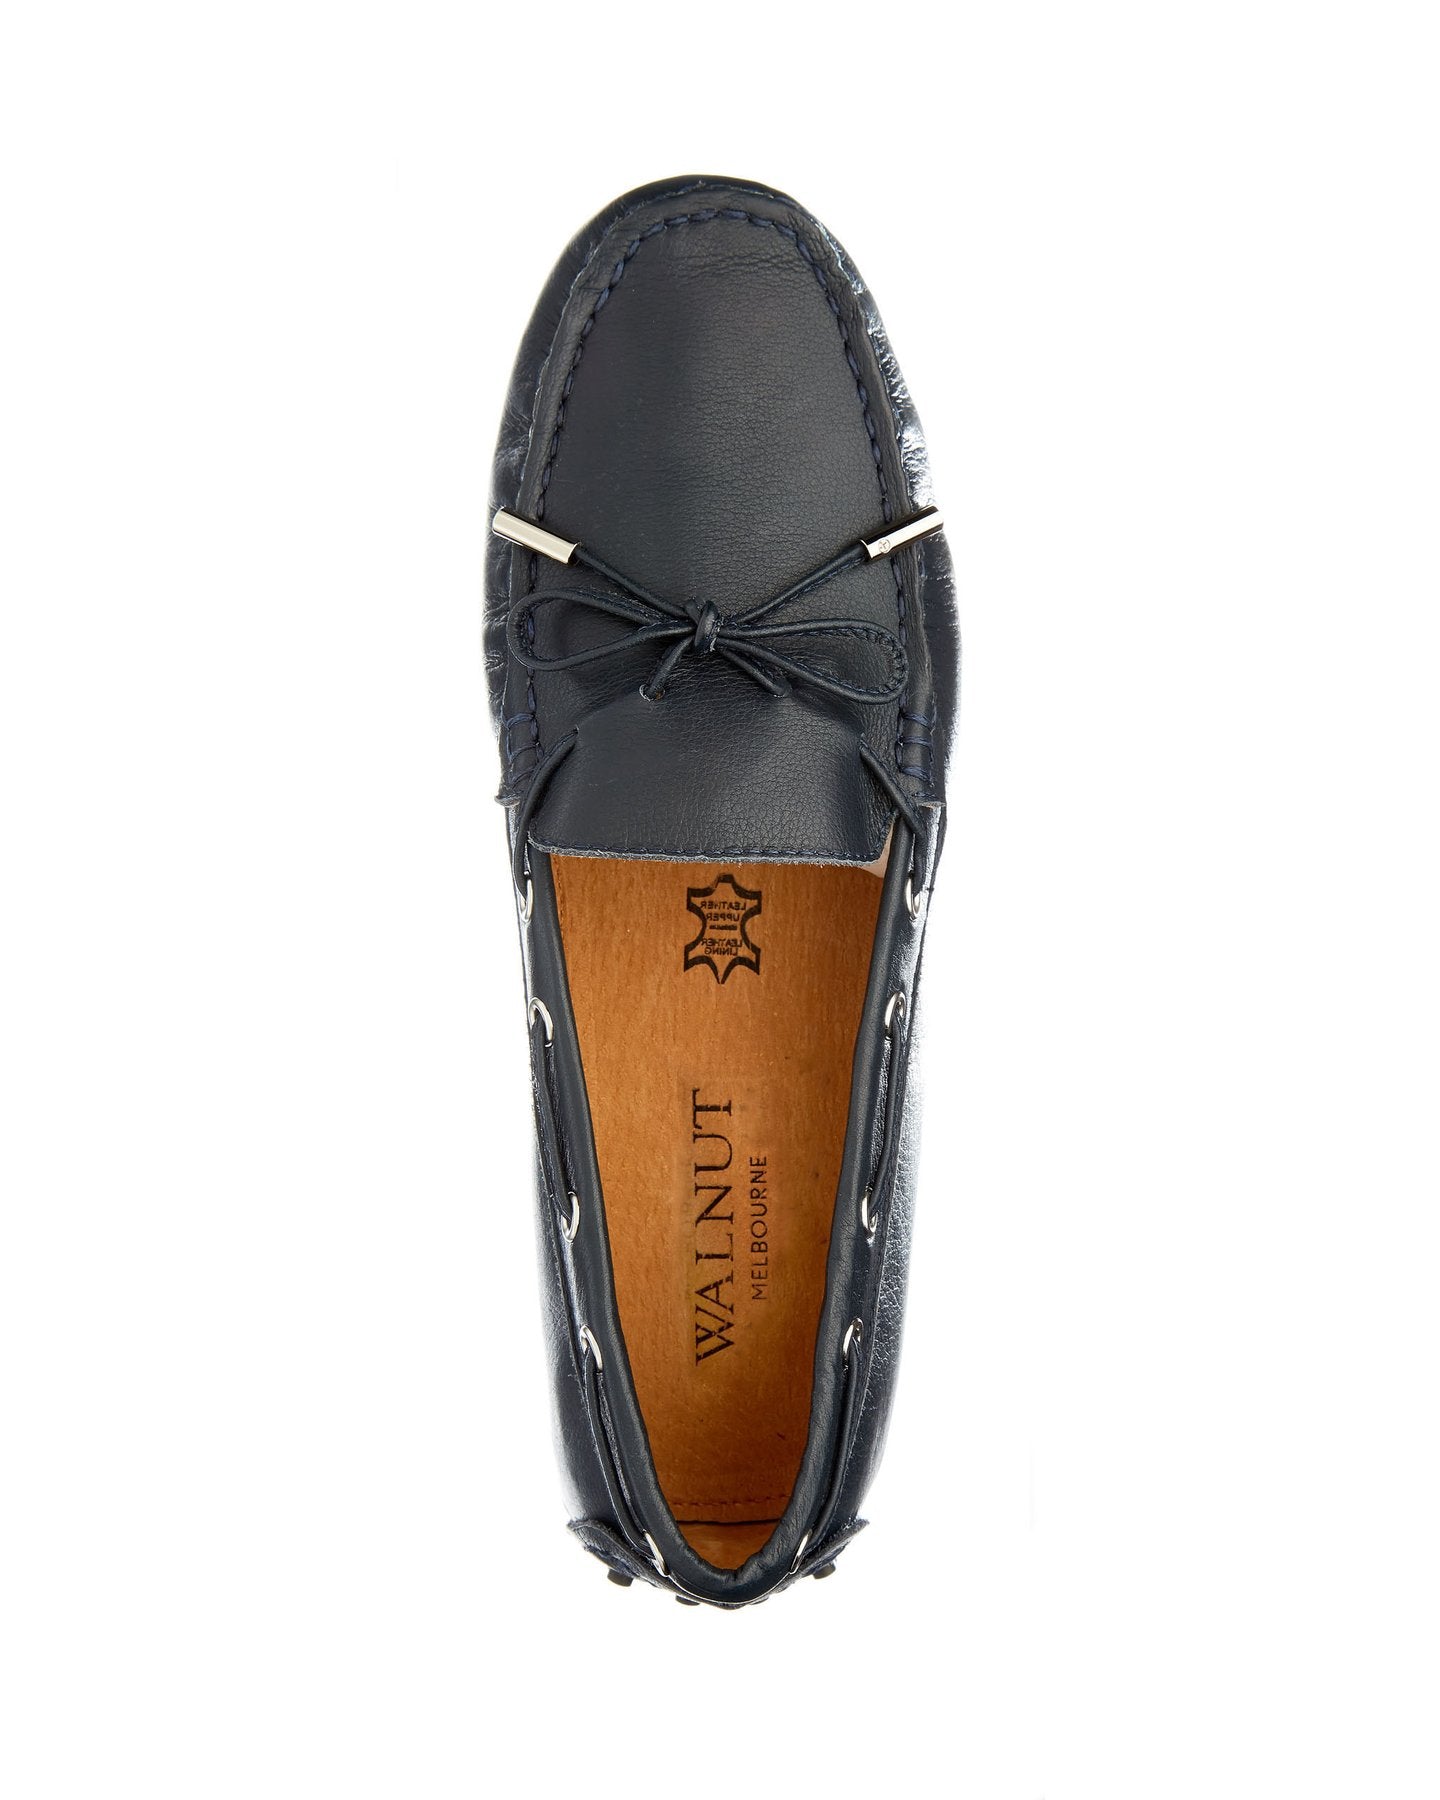 Daria Leather Loafer in Navy - Milu James St